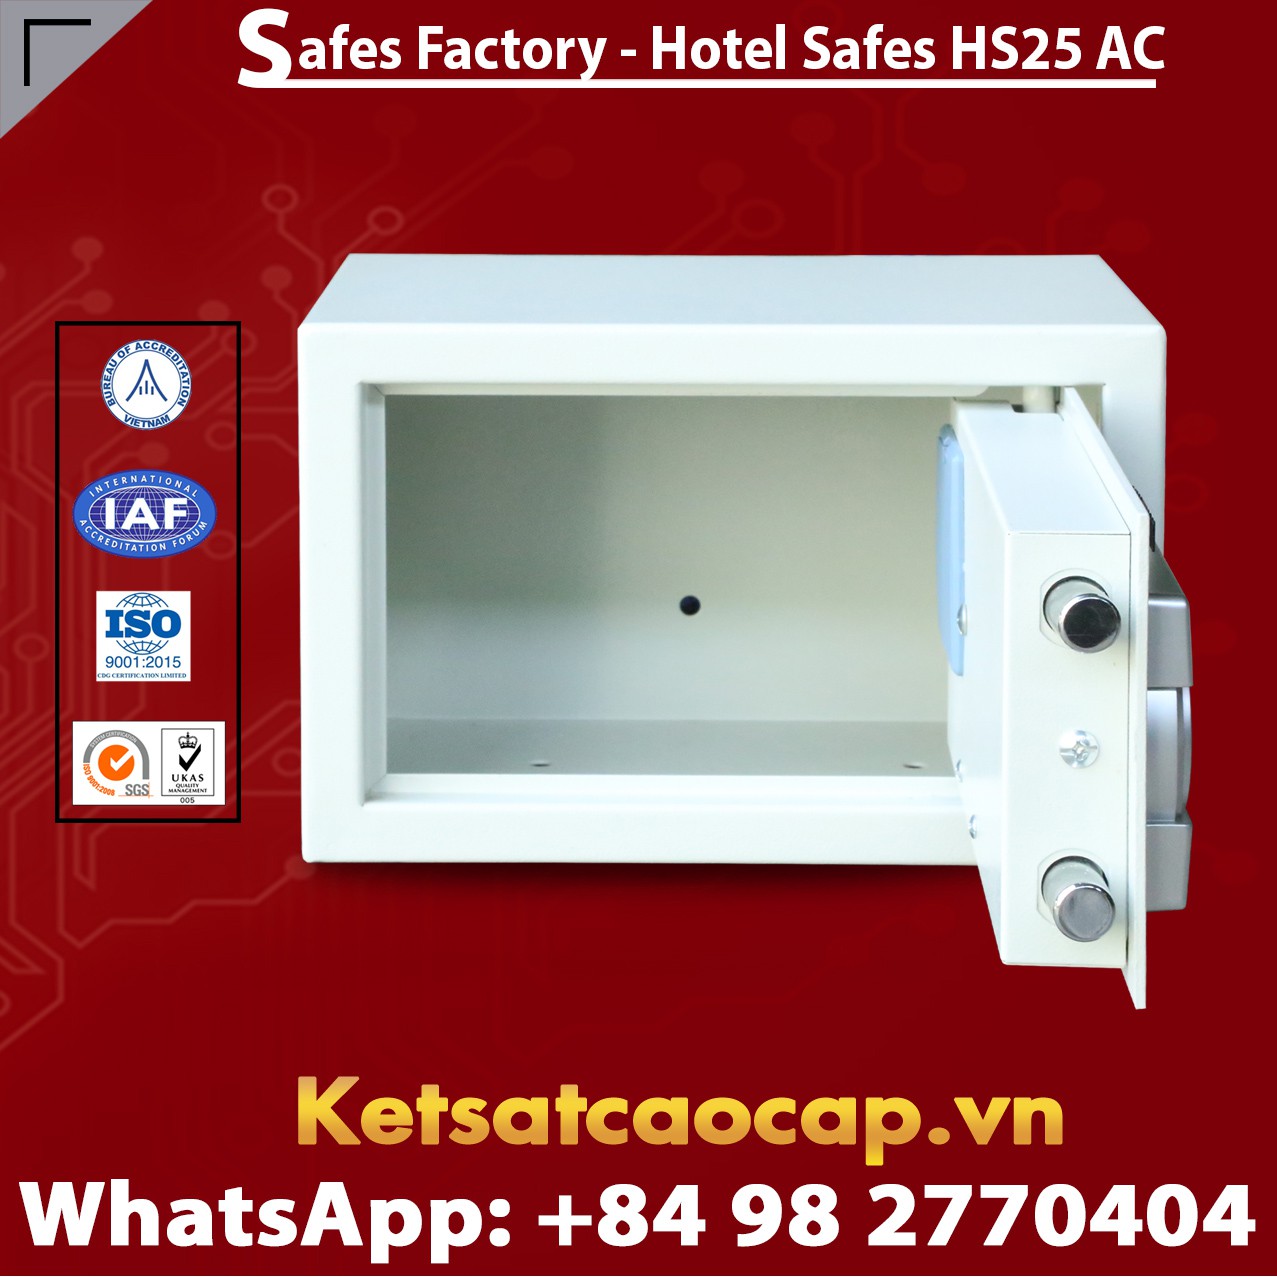 Hotel Room Security Manufacturers & Suppliers‎